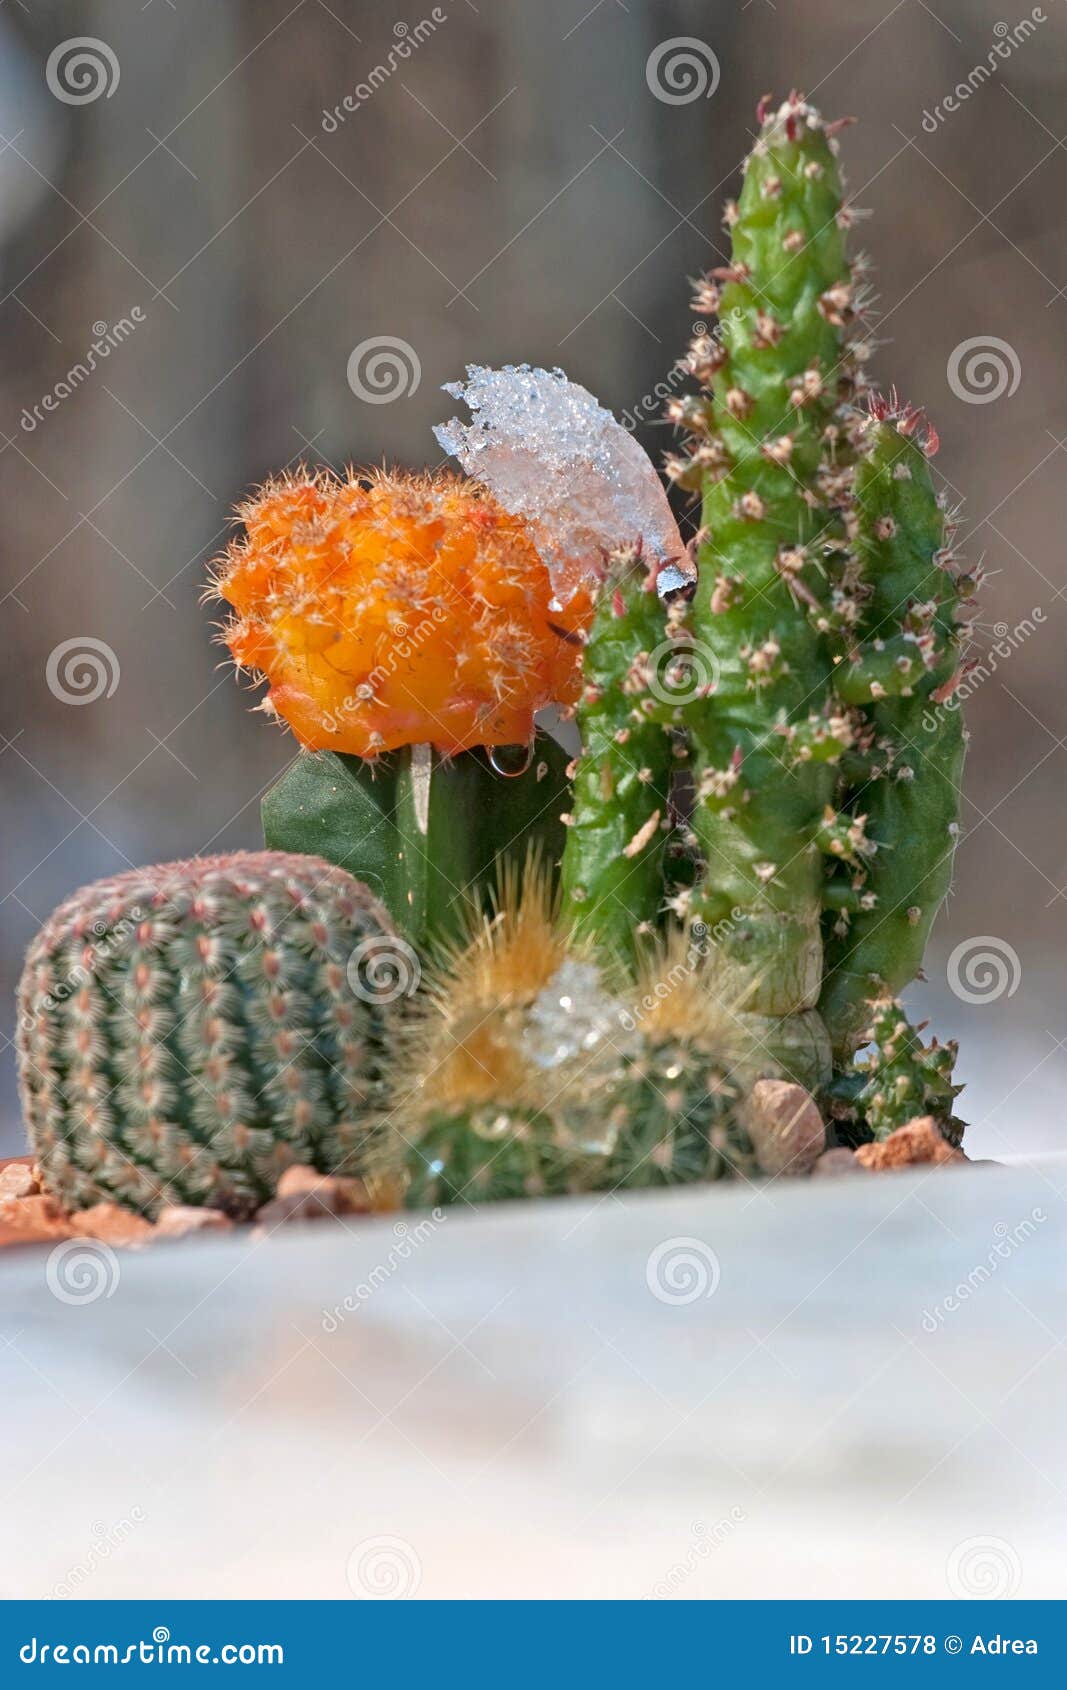 two cactus's in a pot with melting snow on them 